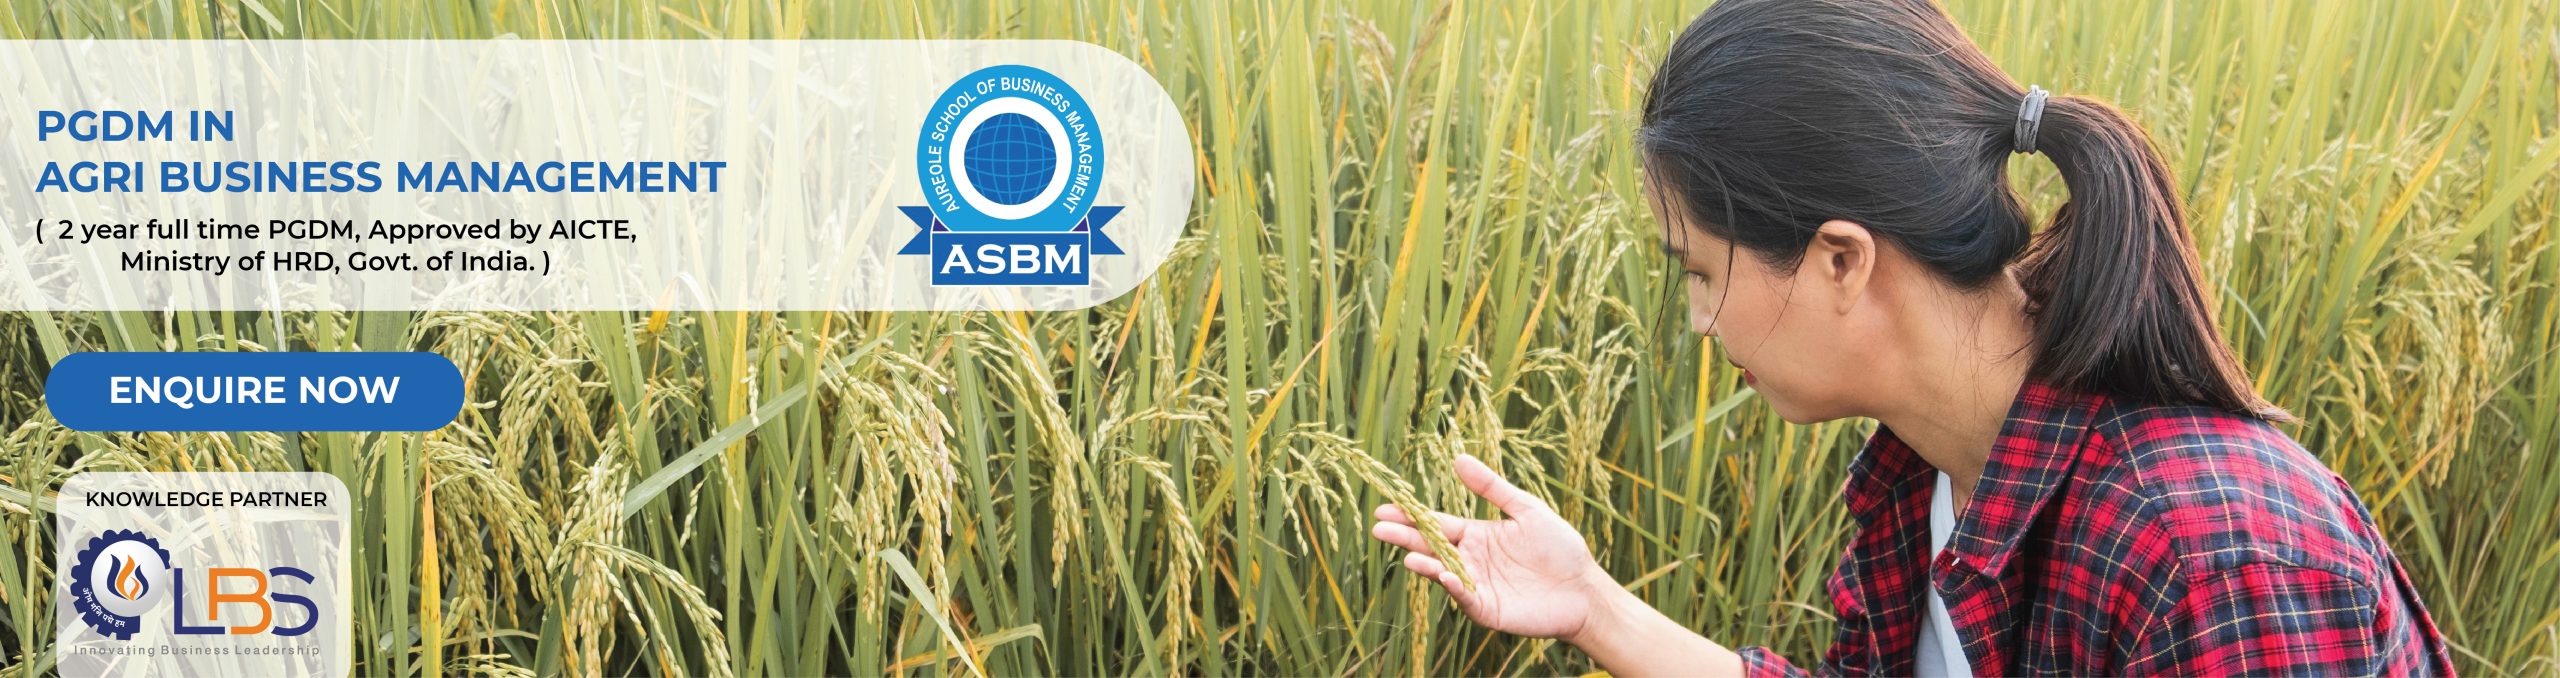 PGDM in AGRI BUSINESS MANAGEMENT